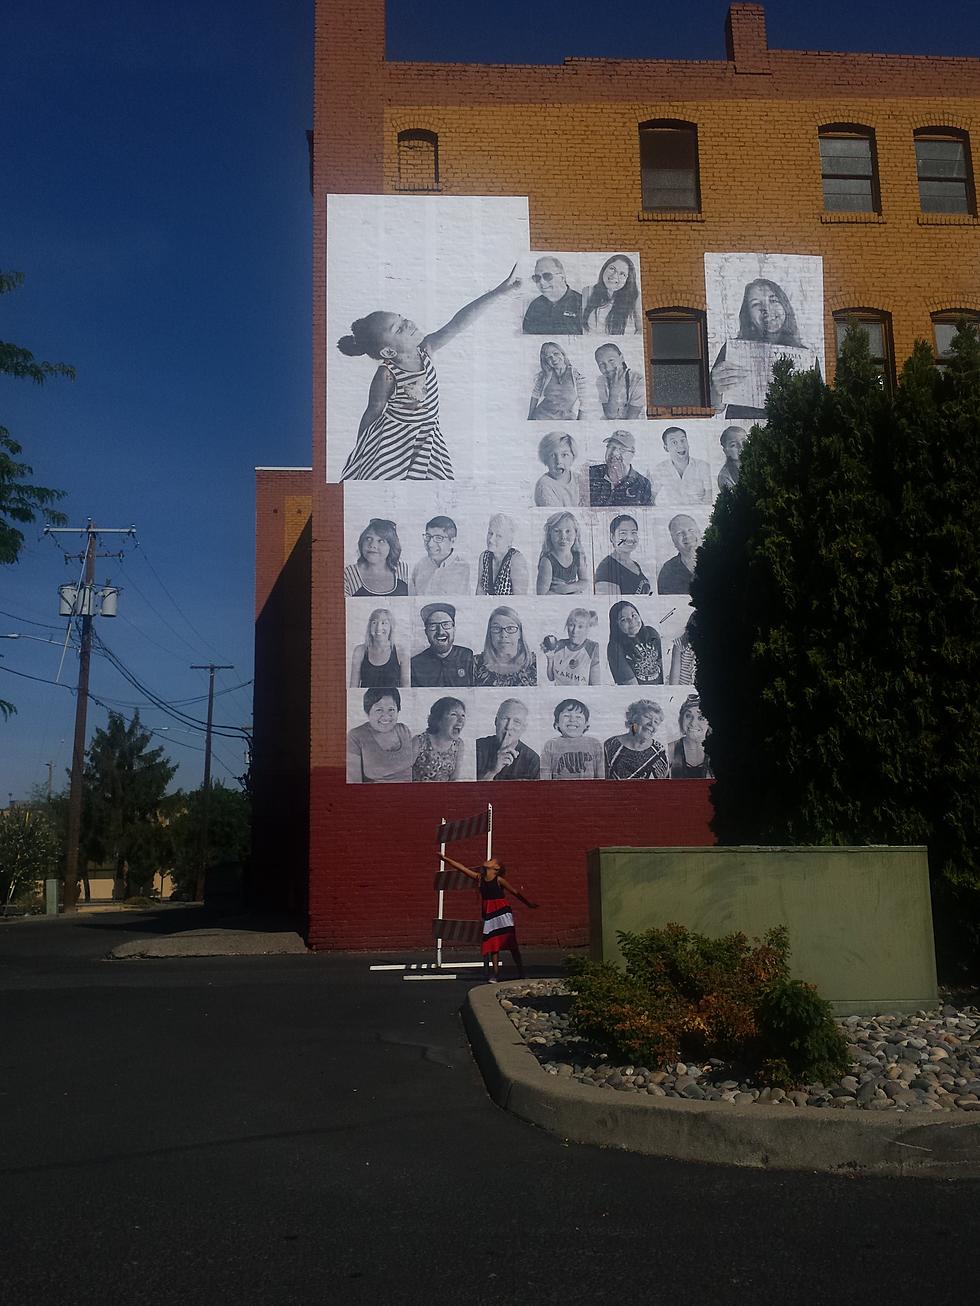 Have You Seen The New Photo Art Wall Off Yakima Ave?